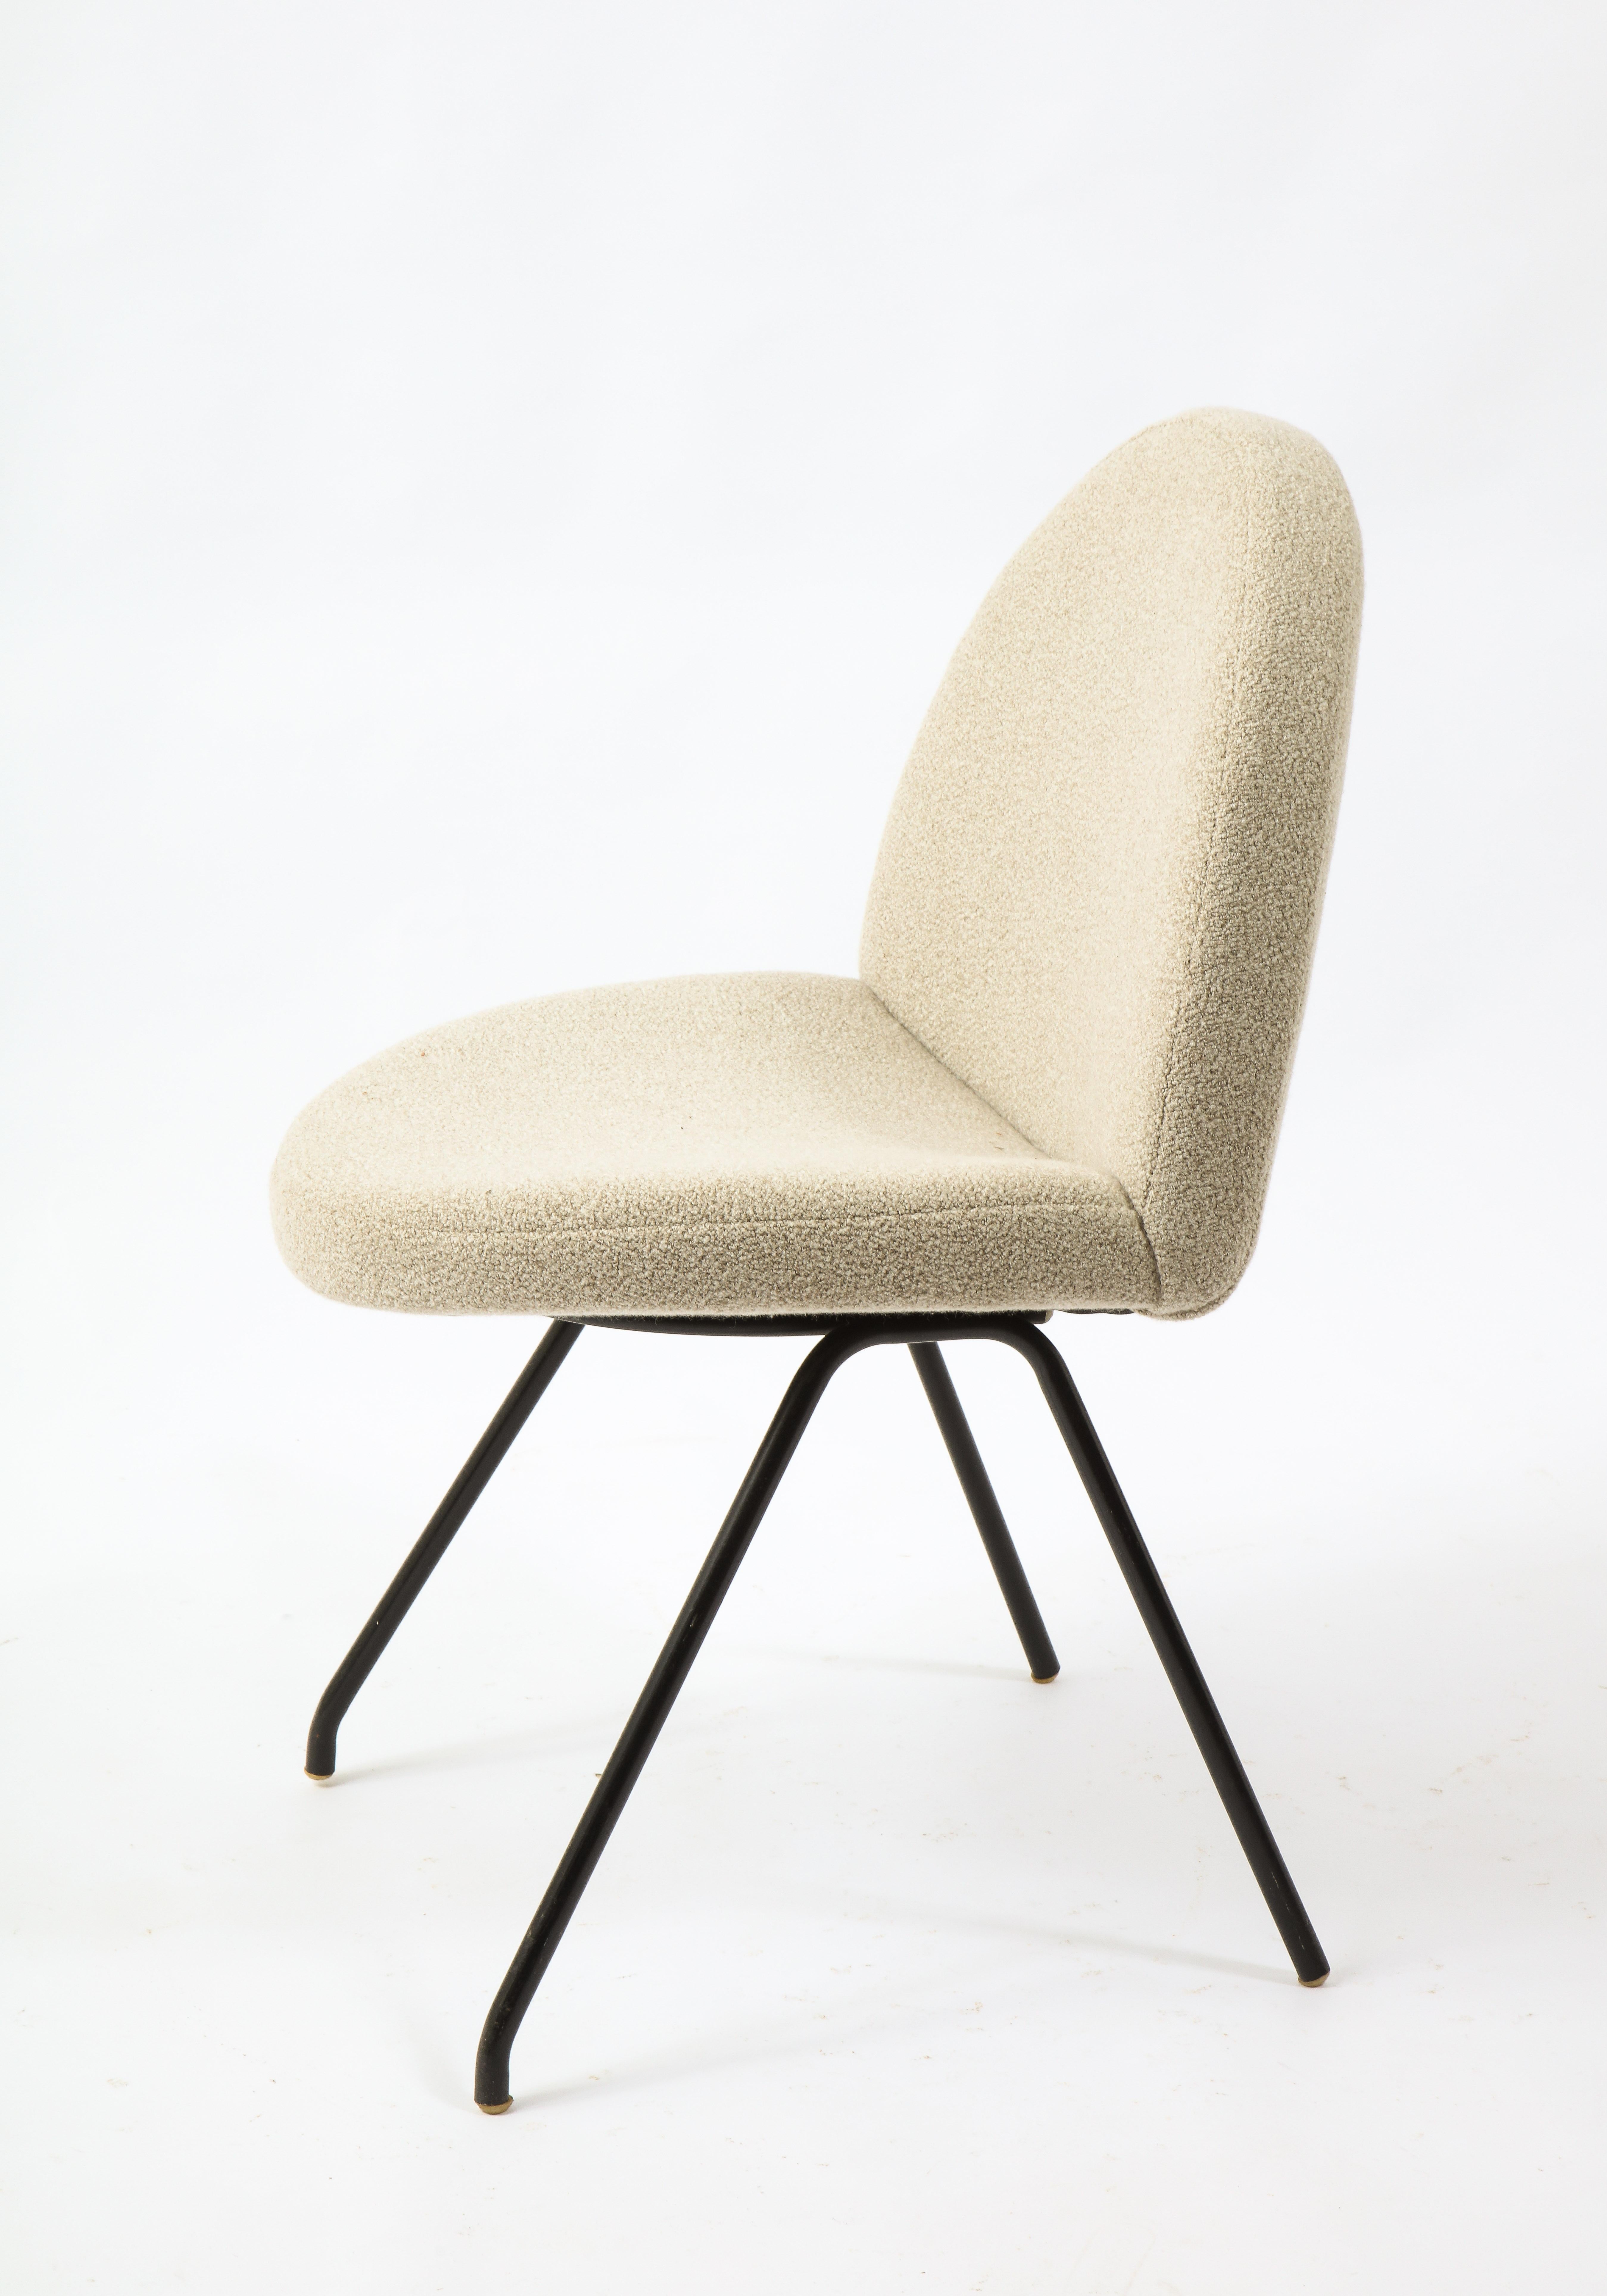 Joseph Andre Motte Set of 12 Model 771 Chair, France 1950's In Good Condition For Sale In New York, NY